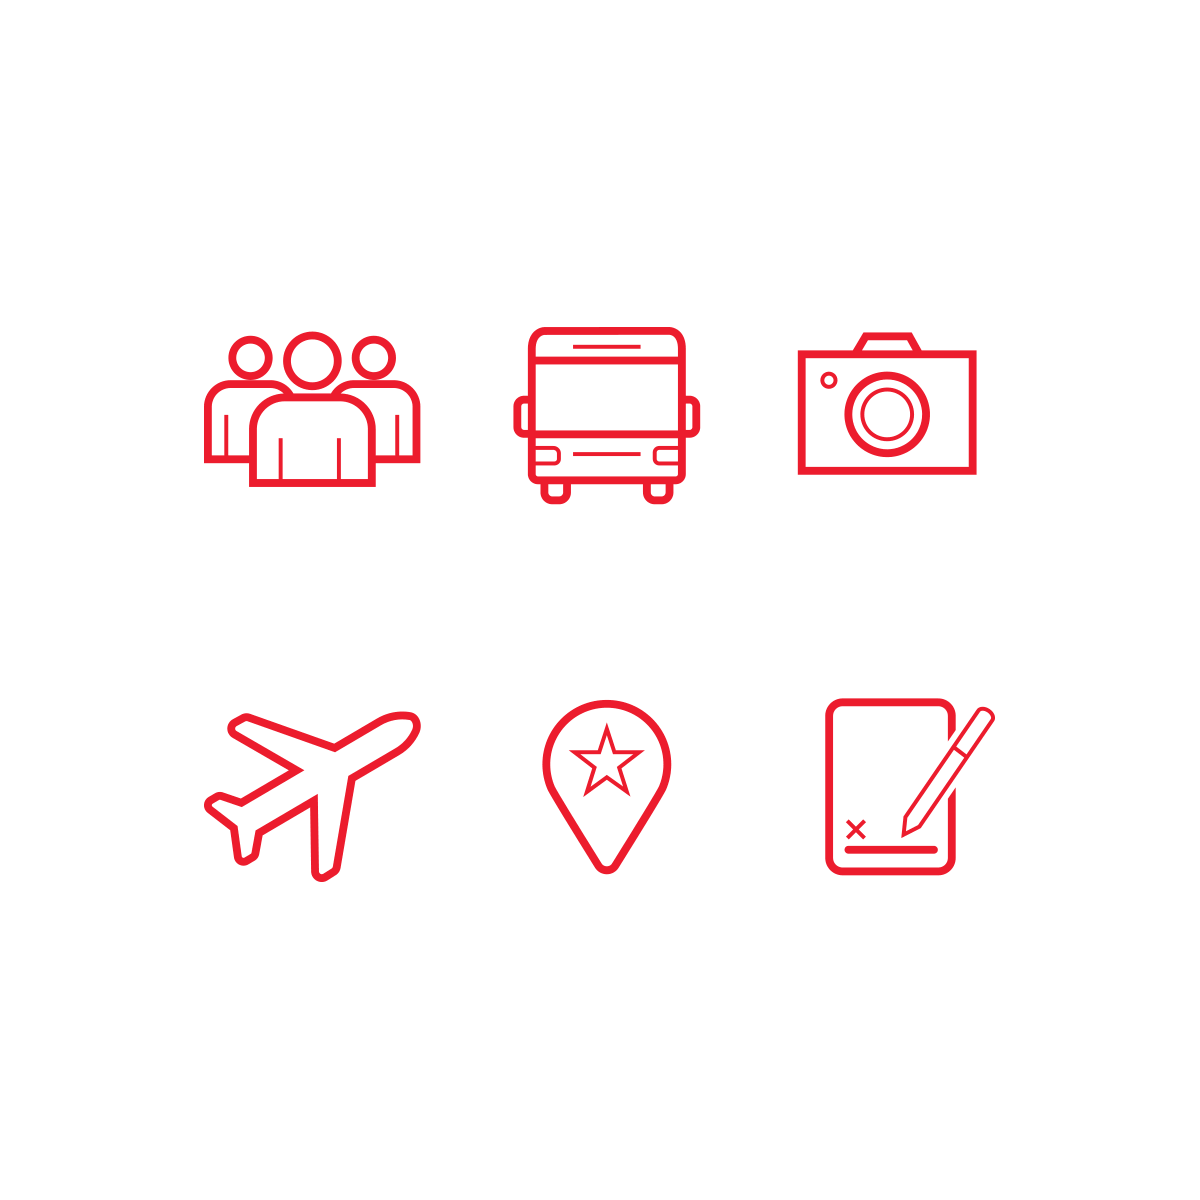 Branding and icon designs for Coach USA.